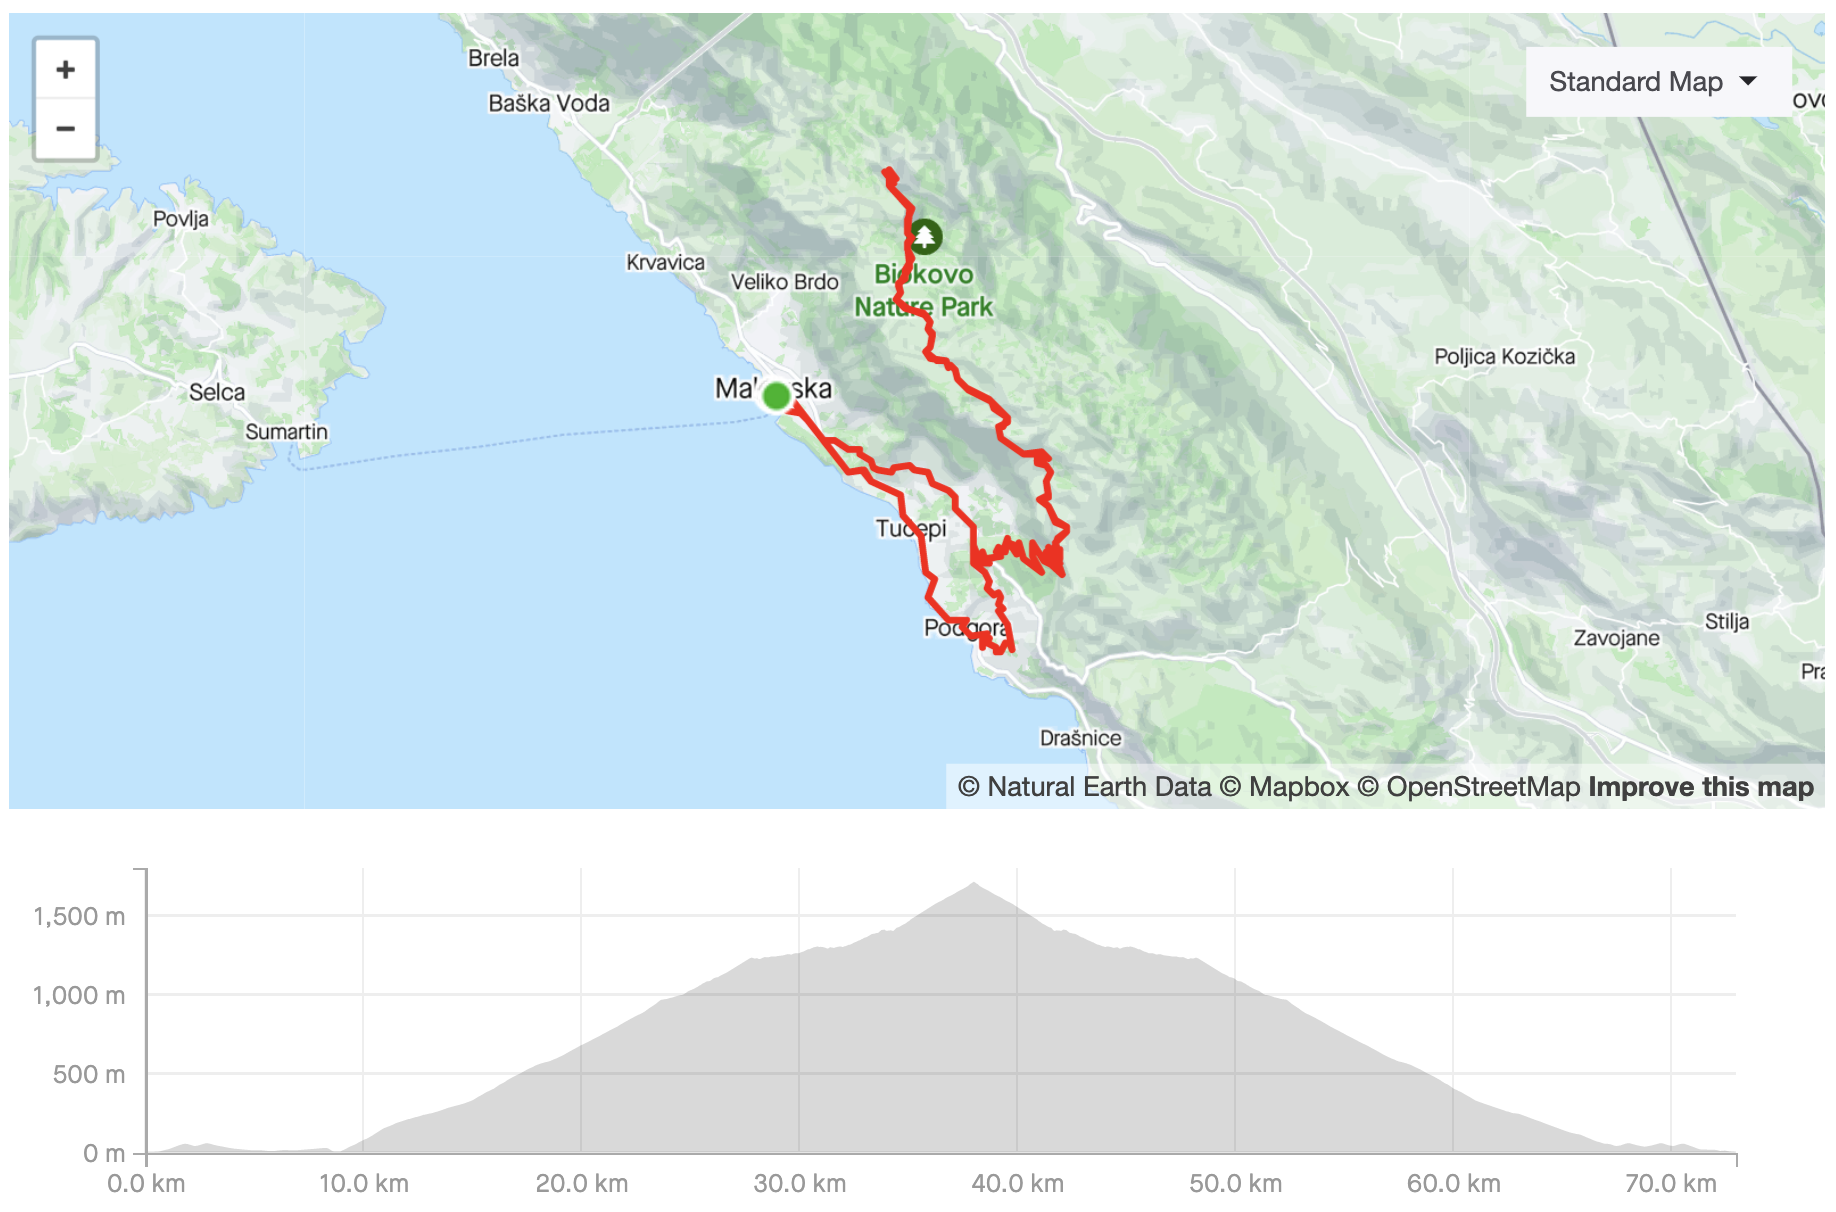 Image 1 - Strava cycling route